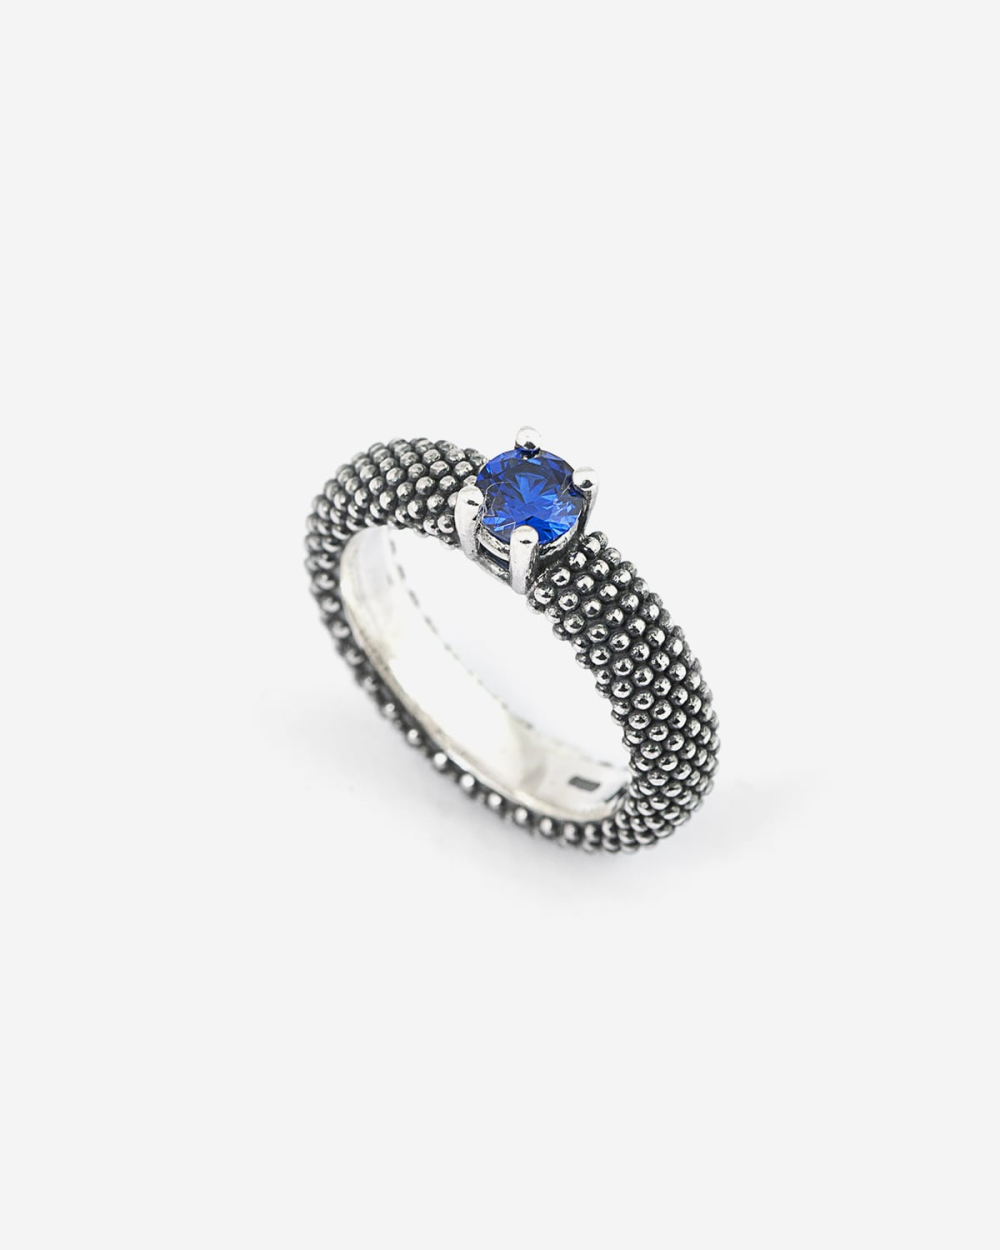 BLUE SPINEL SOLITAIRE DOTTED RING